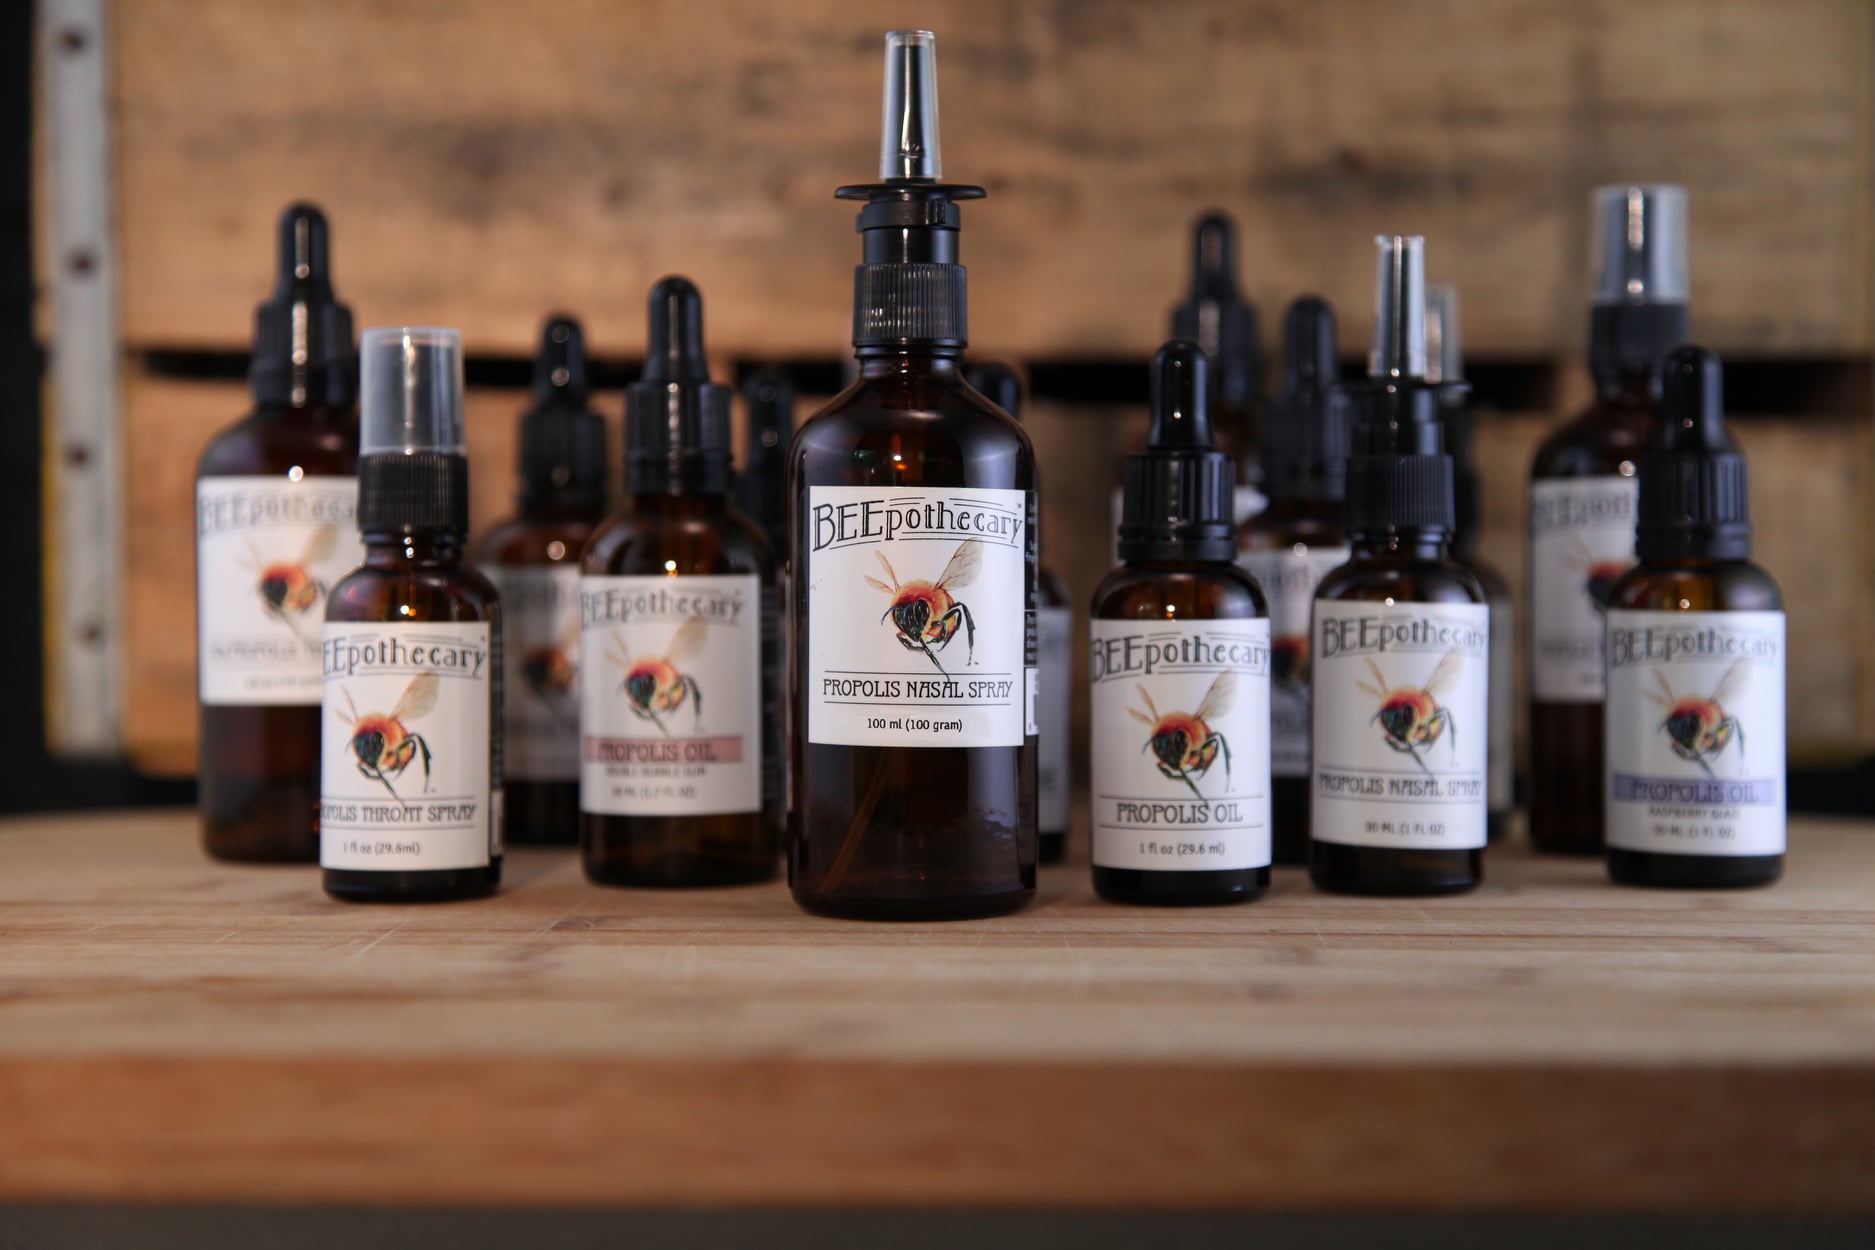 BEEpothecary propolis oil products lined up on a wooden table.